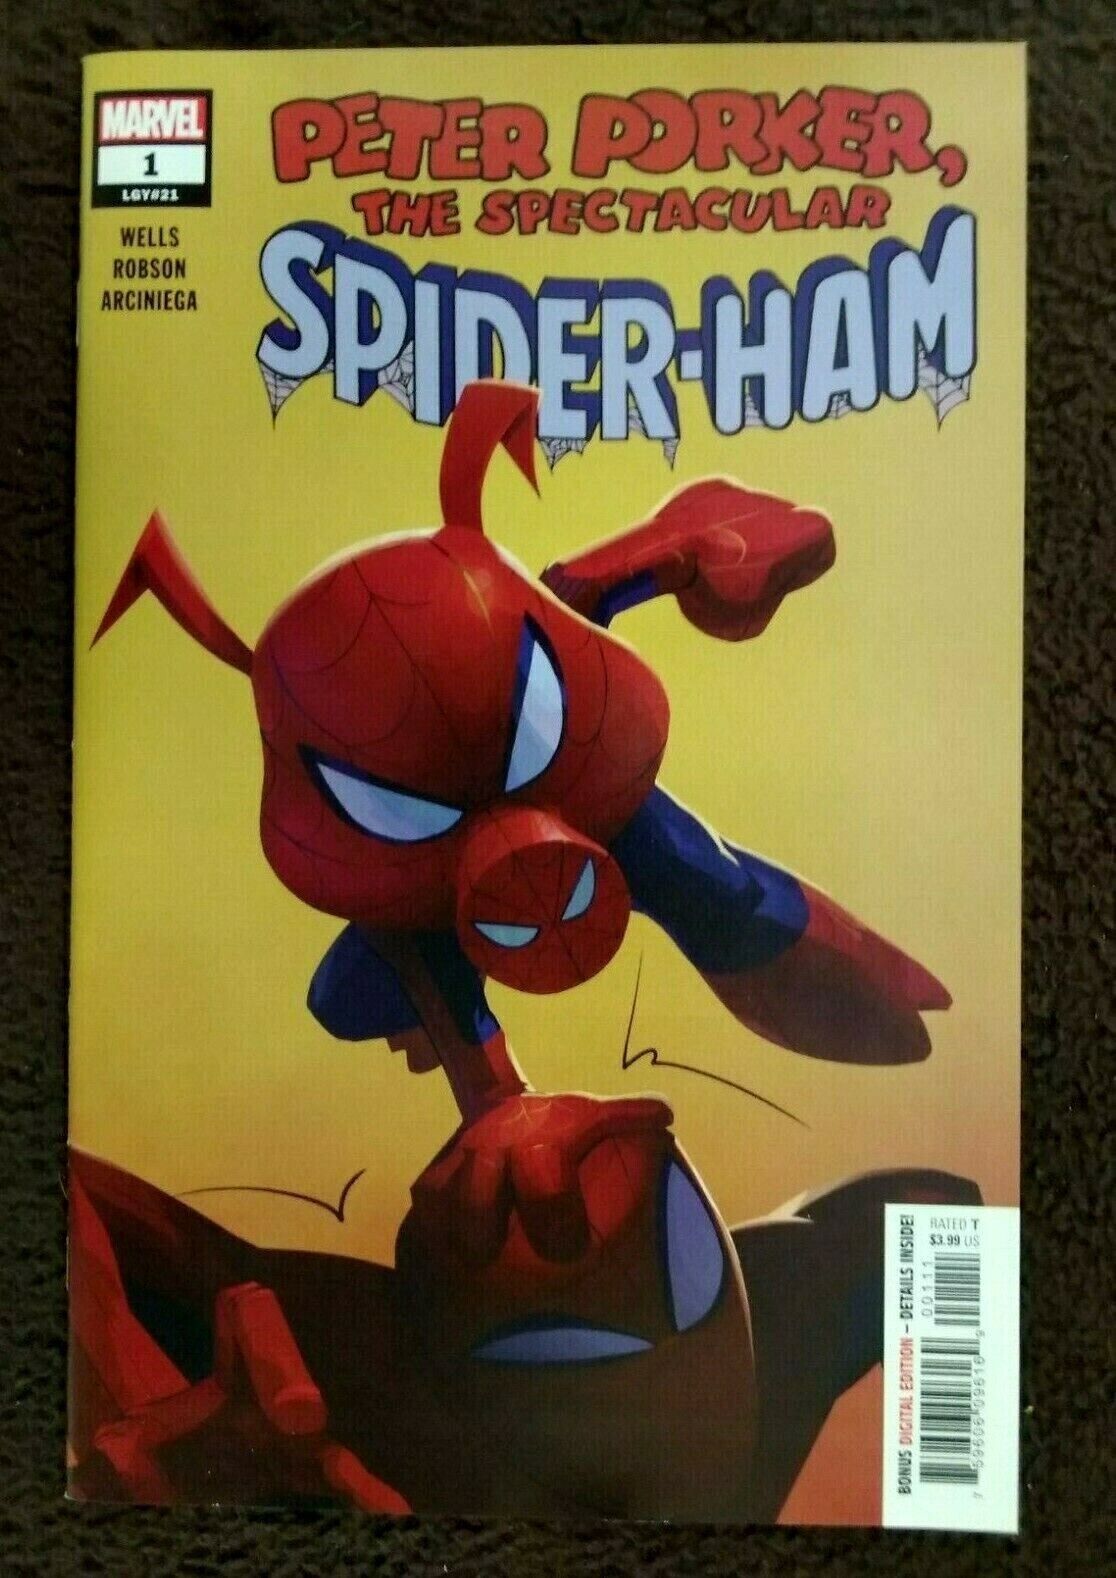 PETER PORKER THE SPECTACULAR SPIDER-HAM #1 NM 2020 WENDELL DALIT COVER b-8